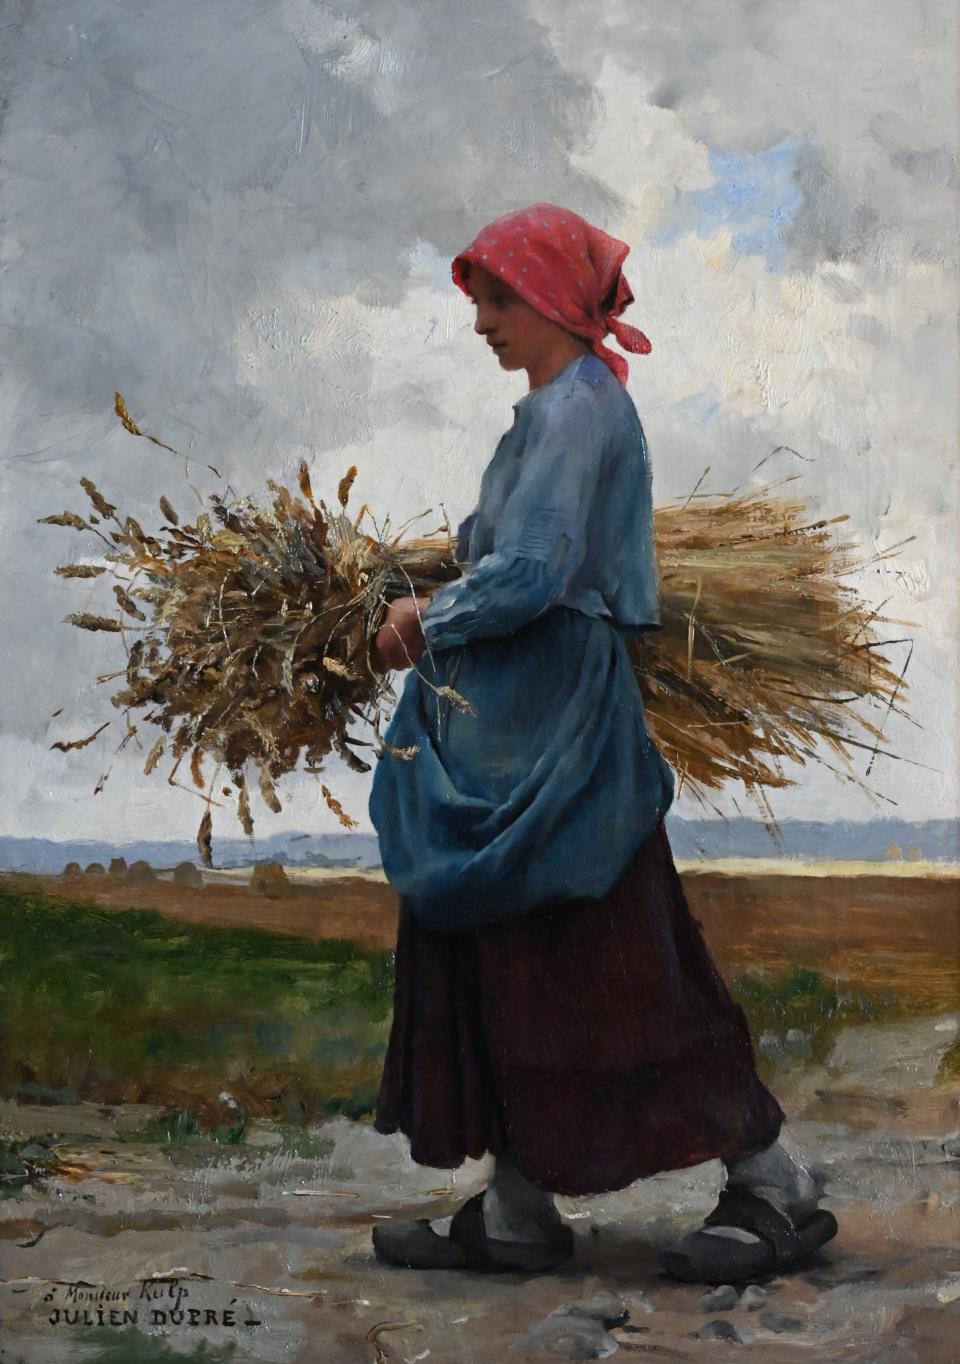 Julien Dupré (French, 1851—1910) "Returning from the Fields", n.d. Oil on canvas, 18 x 13 inches